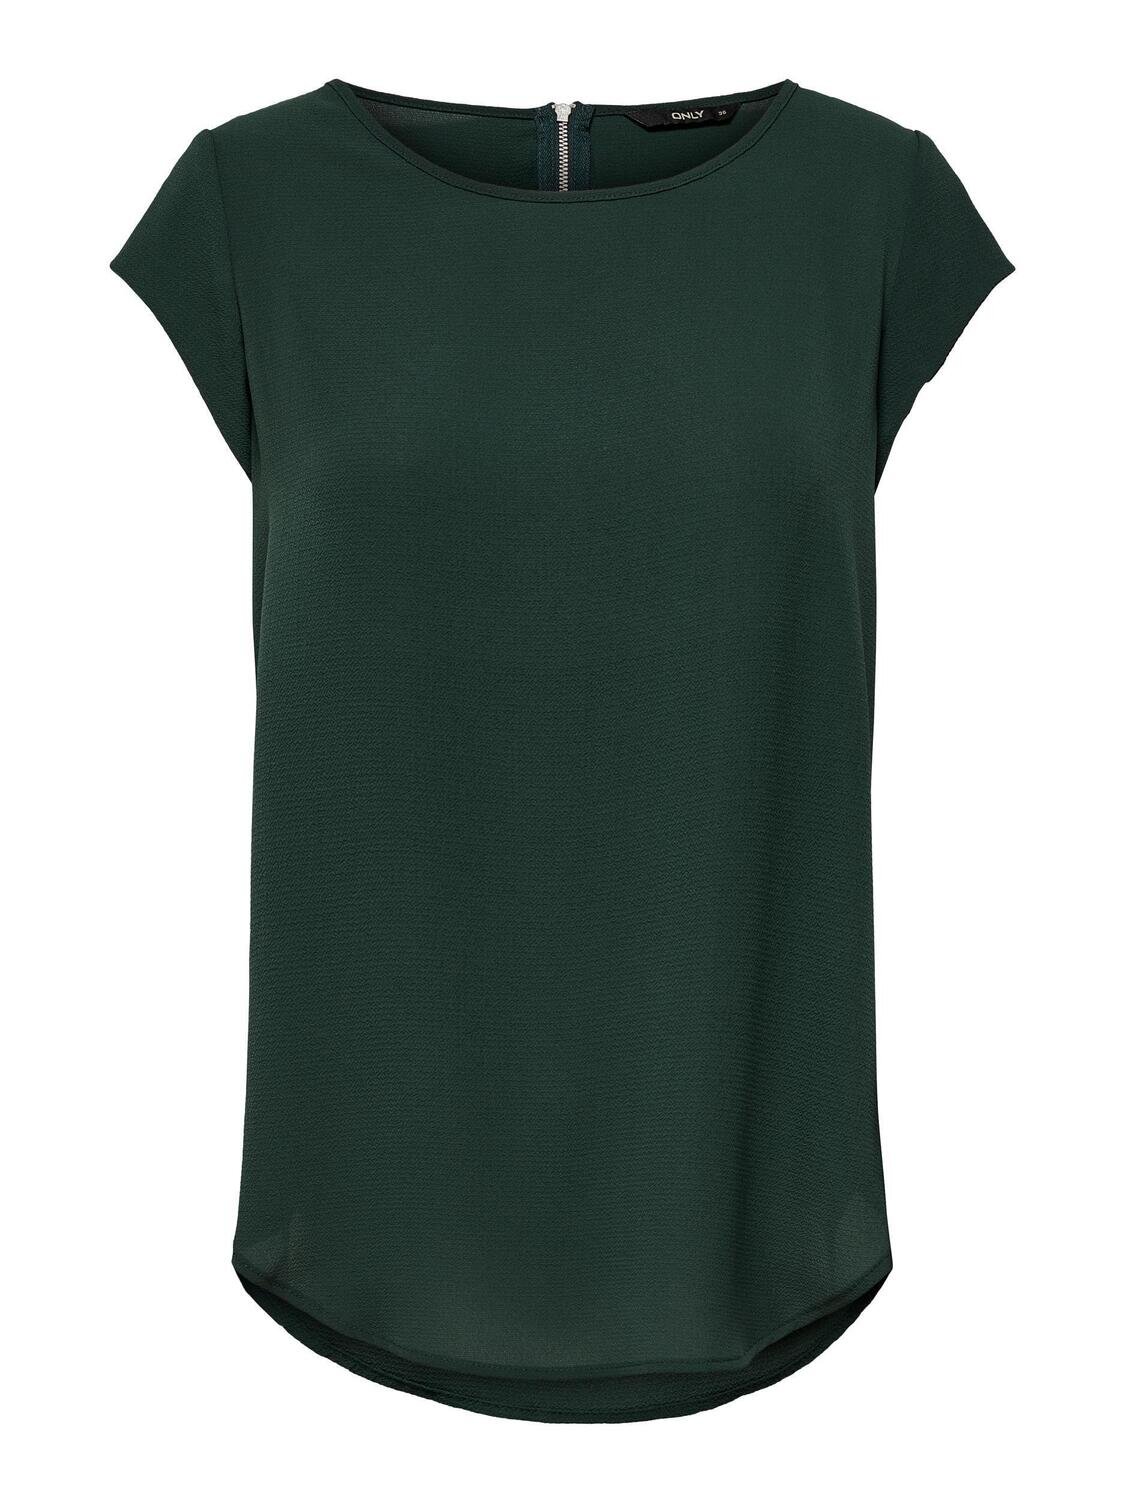 ONLVIC S/S SOLID TOP NOOS PTM Green Gables